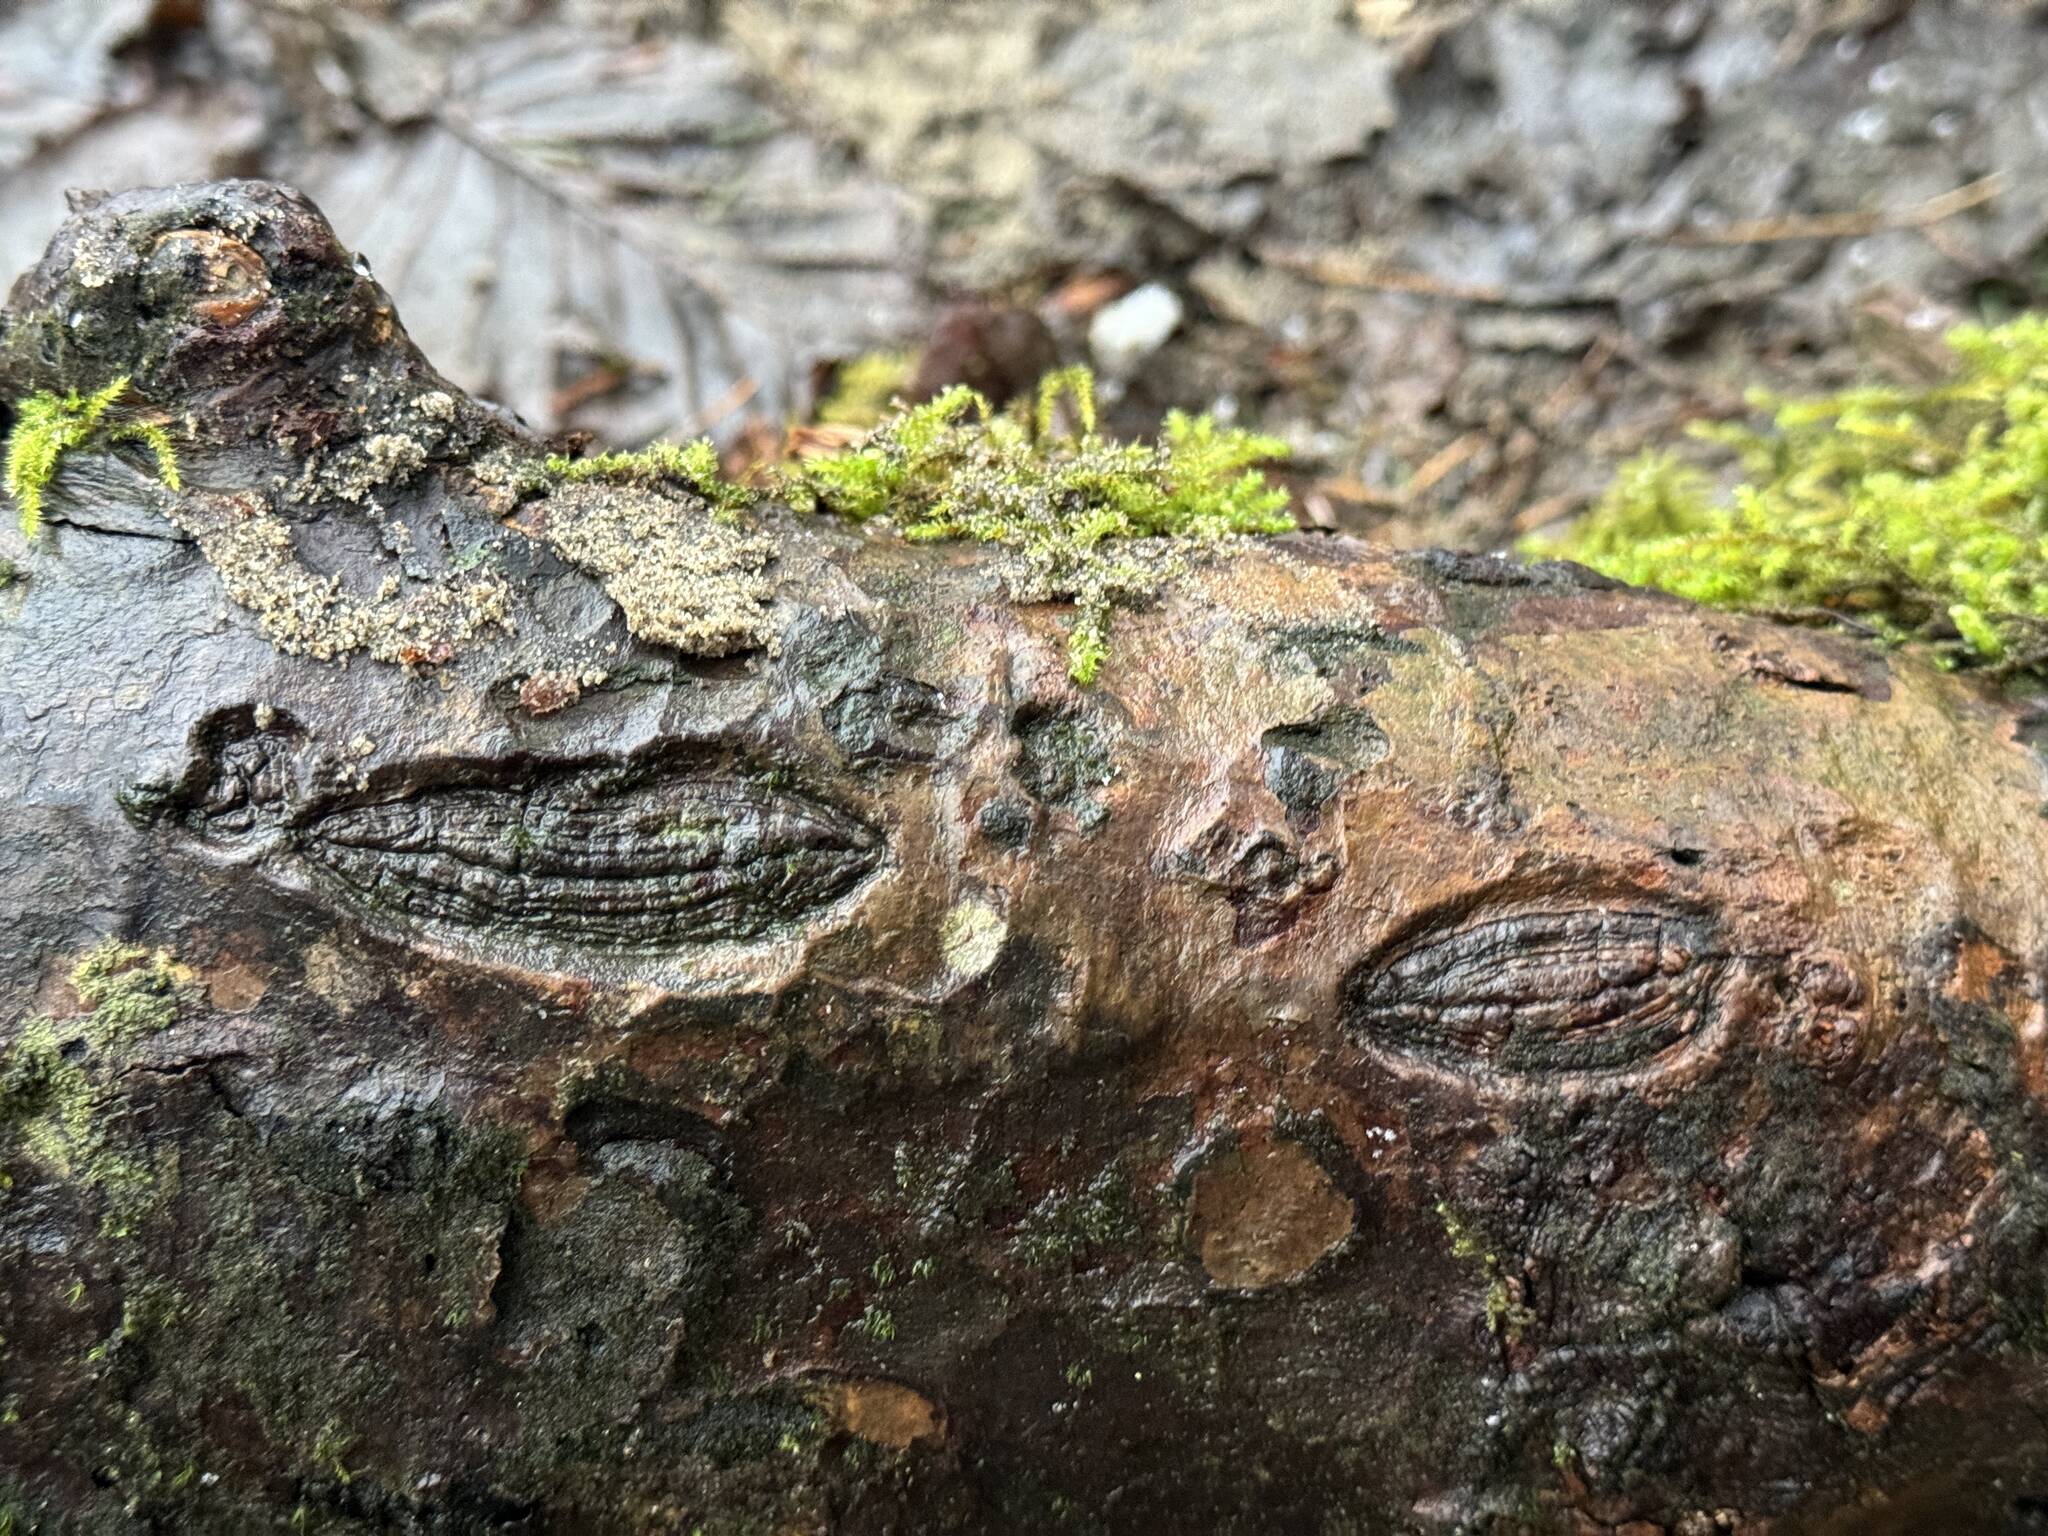 Scars on a tree look like fossils of an ancient sea critter.on the Lemon Creek Trail on Dec. 10. (Photo by Deana Barajas)